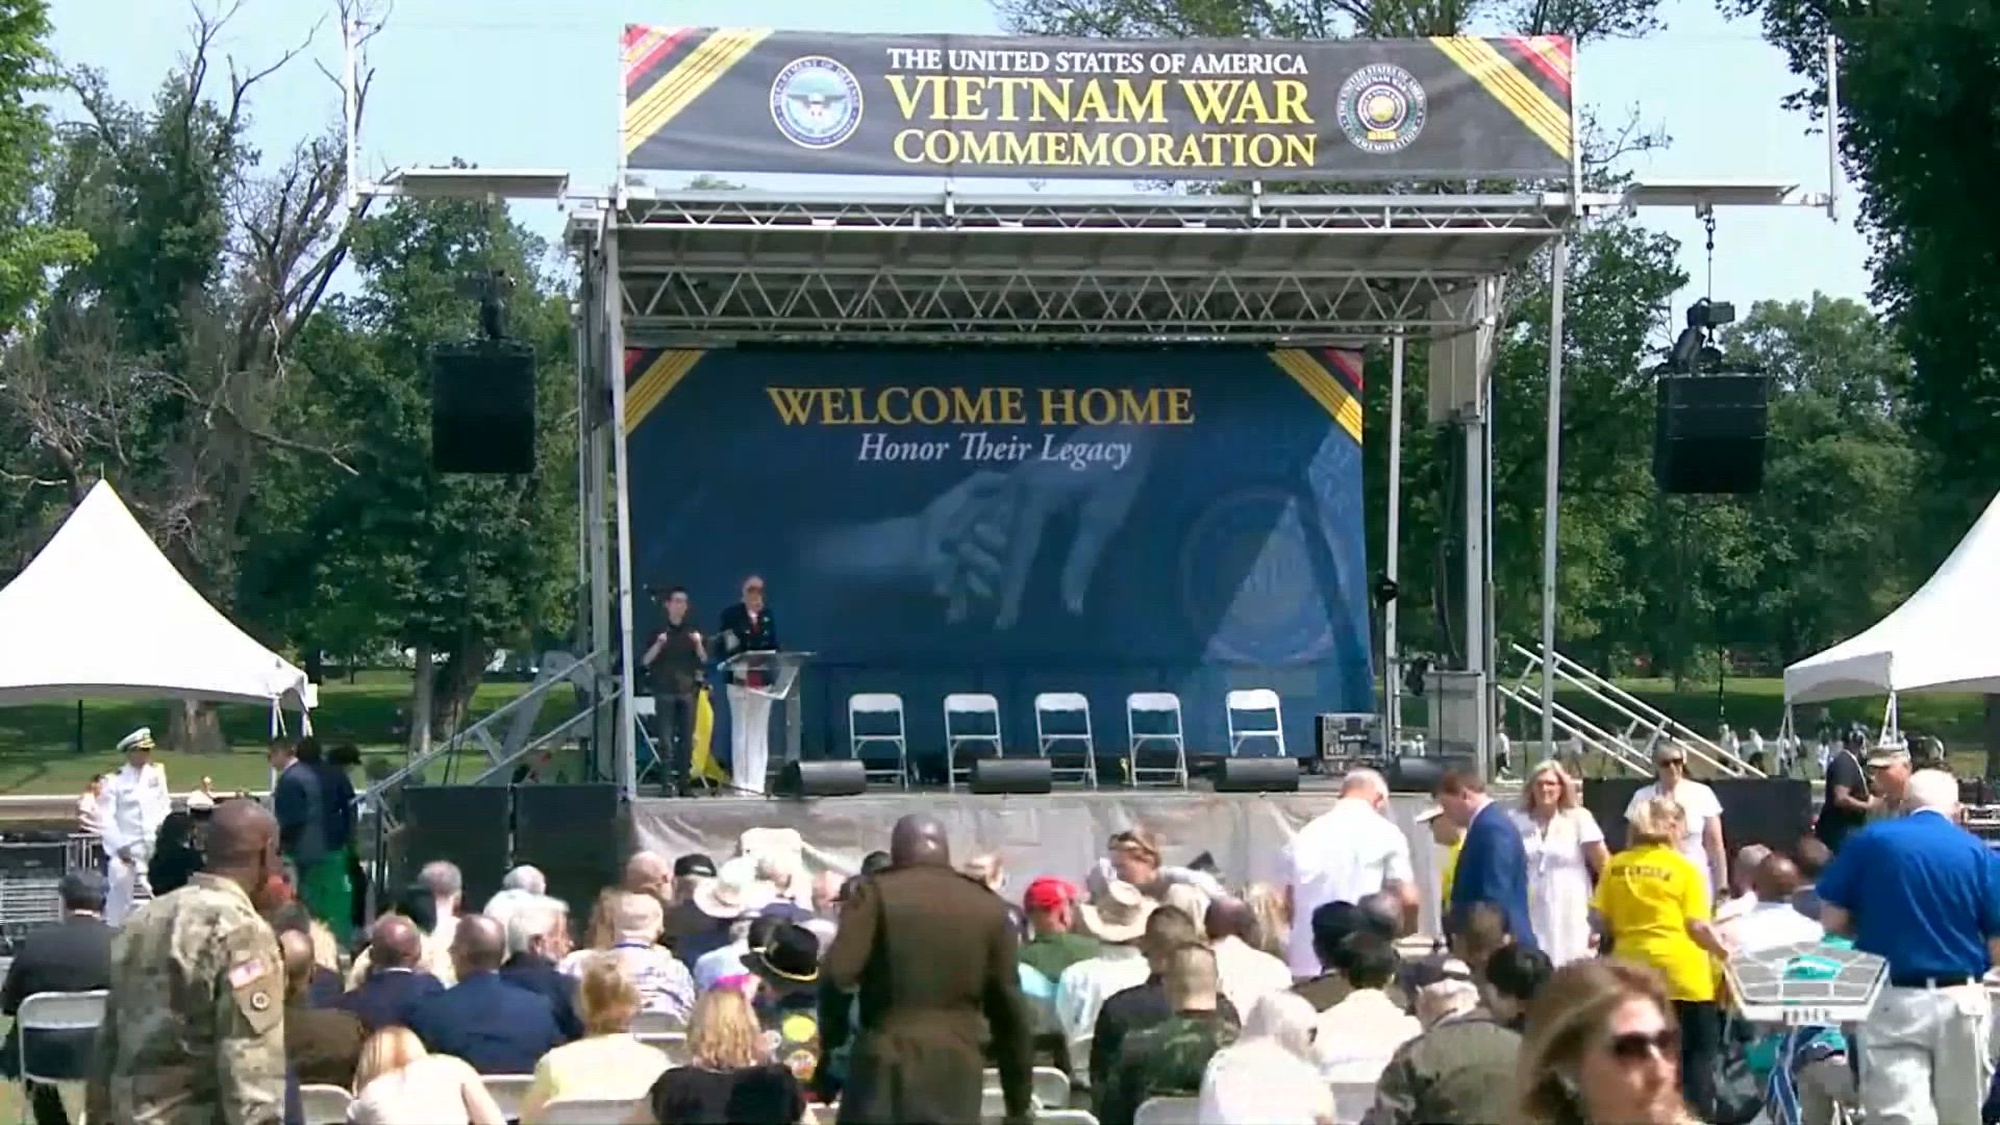 The Vietnam War Commemoration, a national 50th anniversary remembrance, holds a “welcome home” event in the National Mall. It honors the legacy of Vietnam veterans and their families, the contributions of individual citizens, allies, armed forces and nongovernmental organizations during the Vietnam War period.